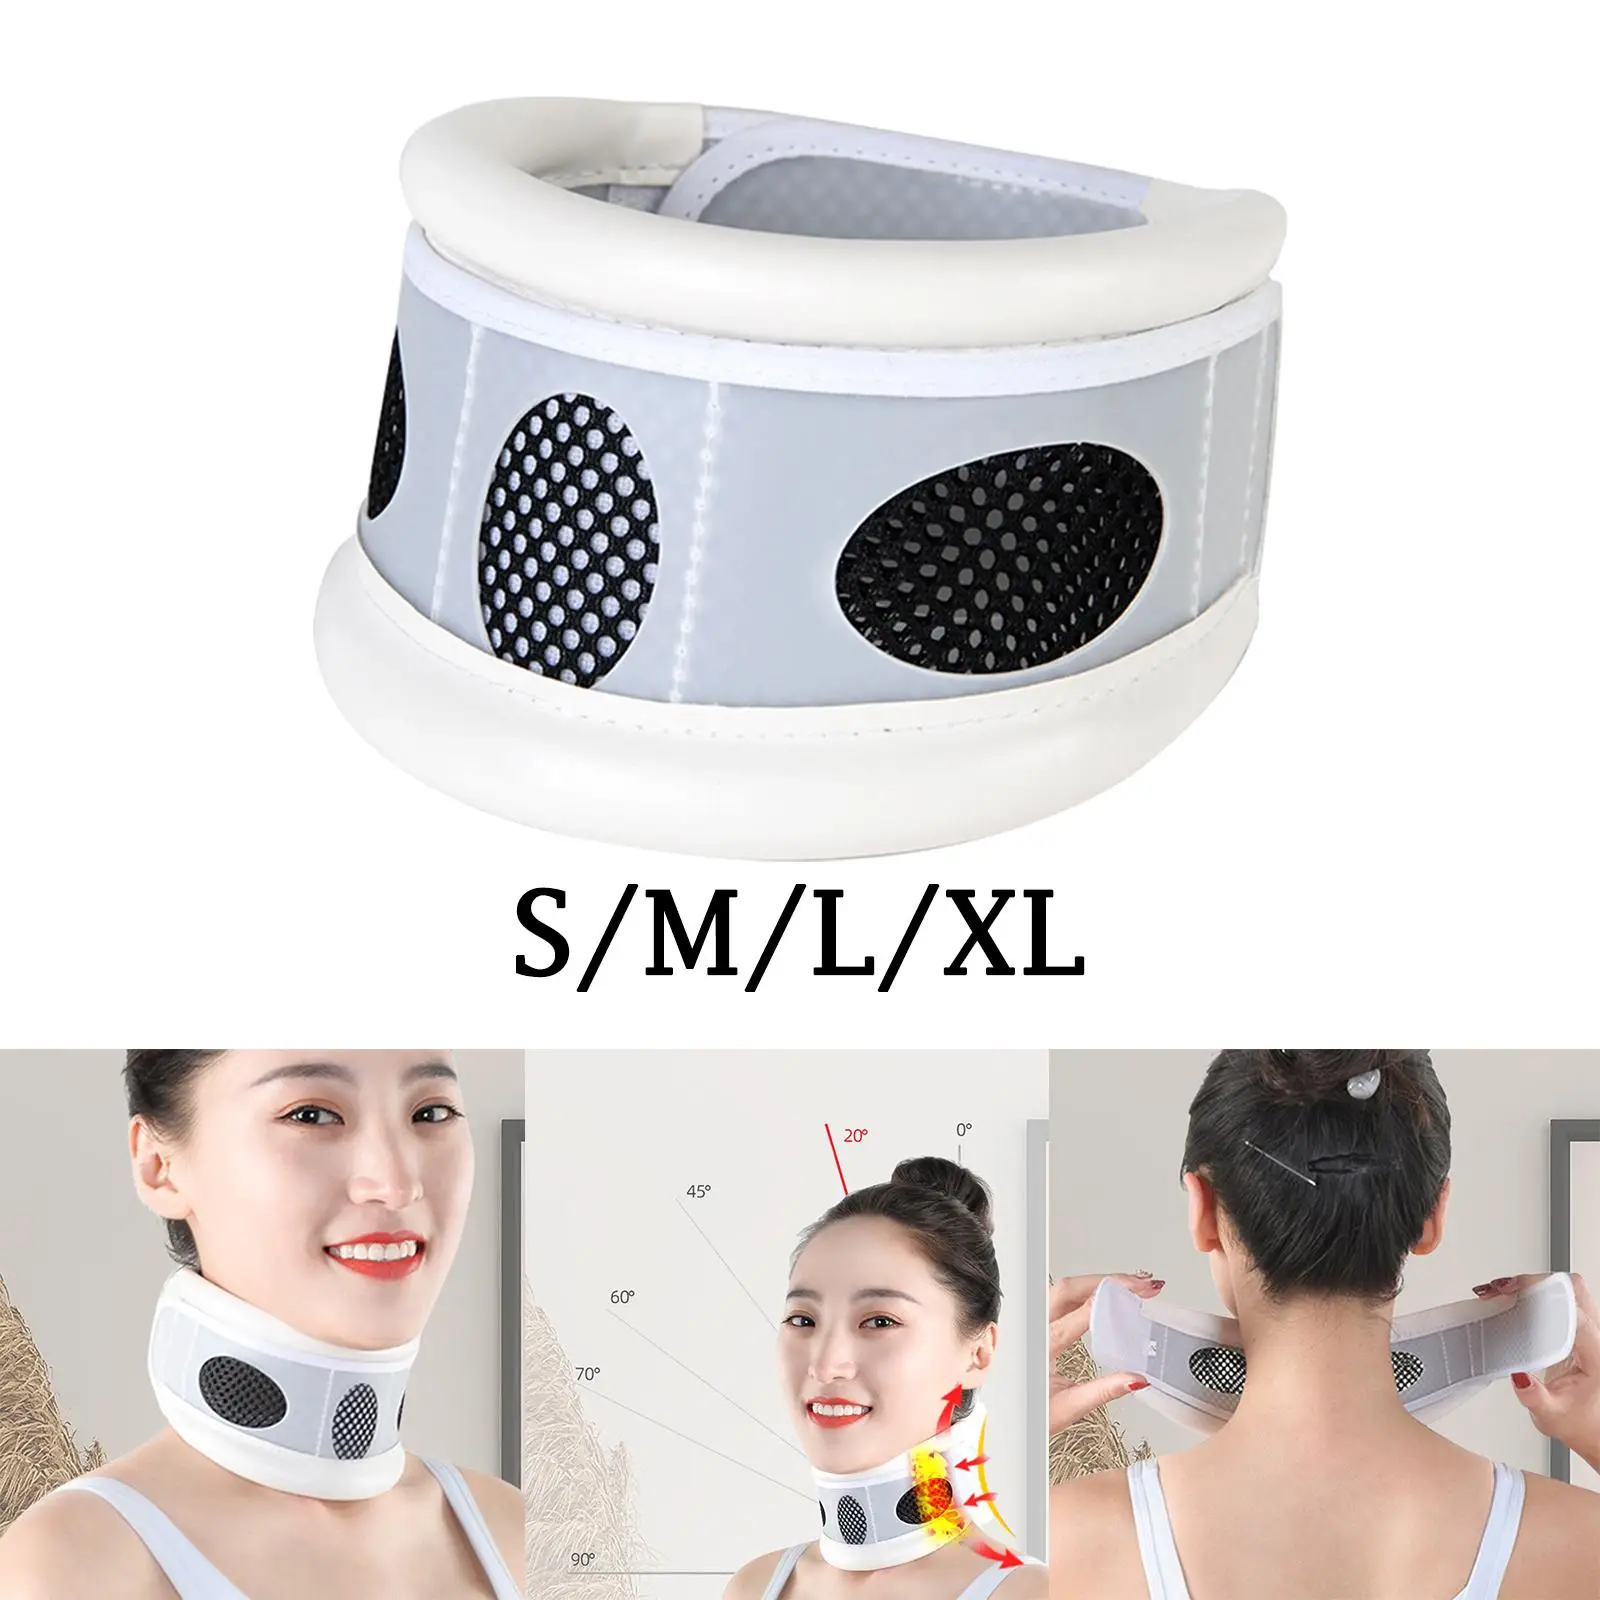 Cervical Neck Traction Device Decompression Portable Light Trusted Adjustable Universal Neck Support for Home women